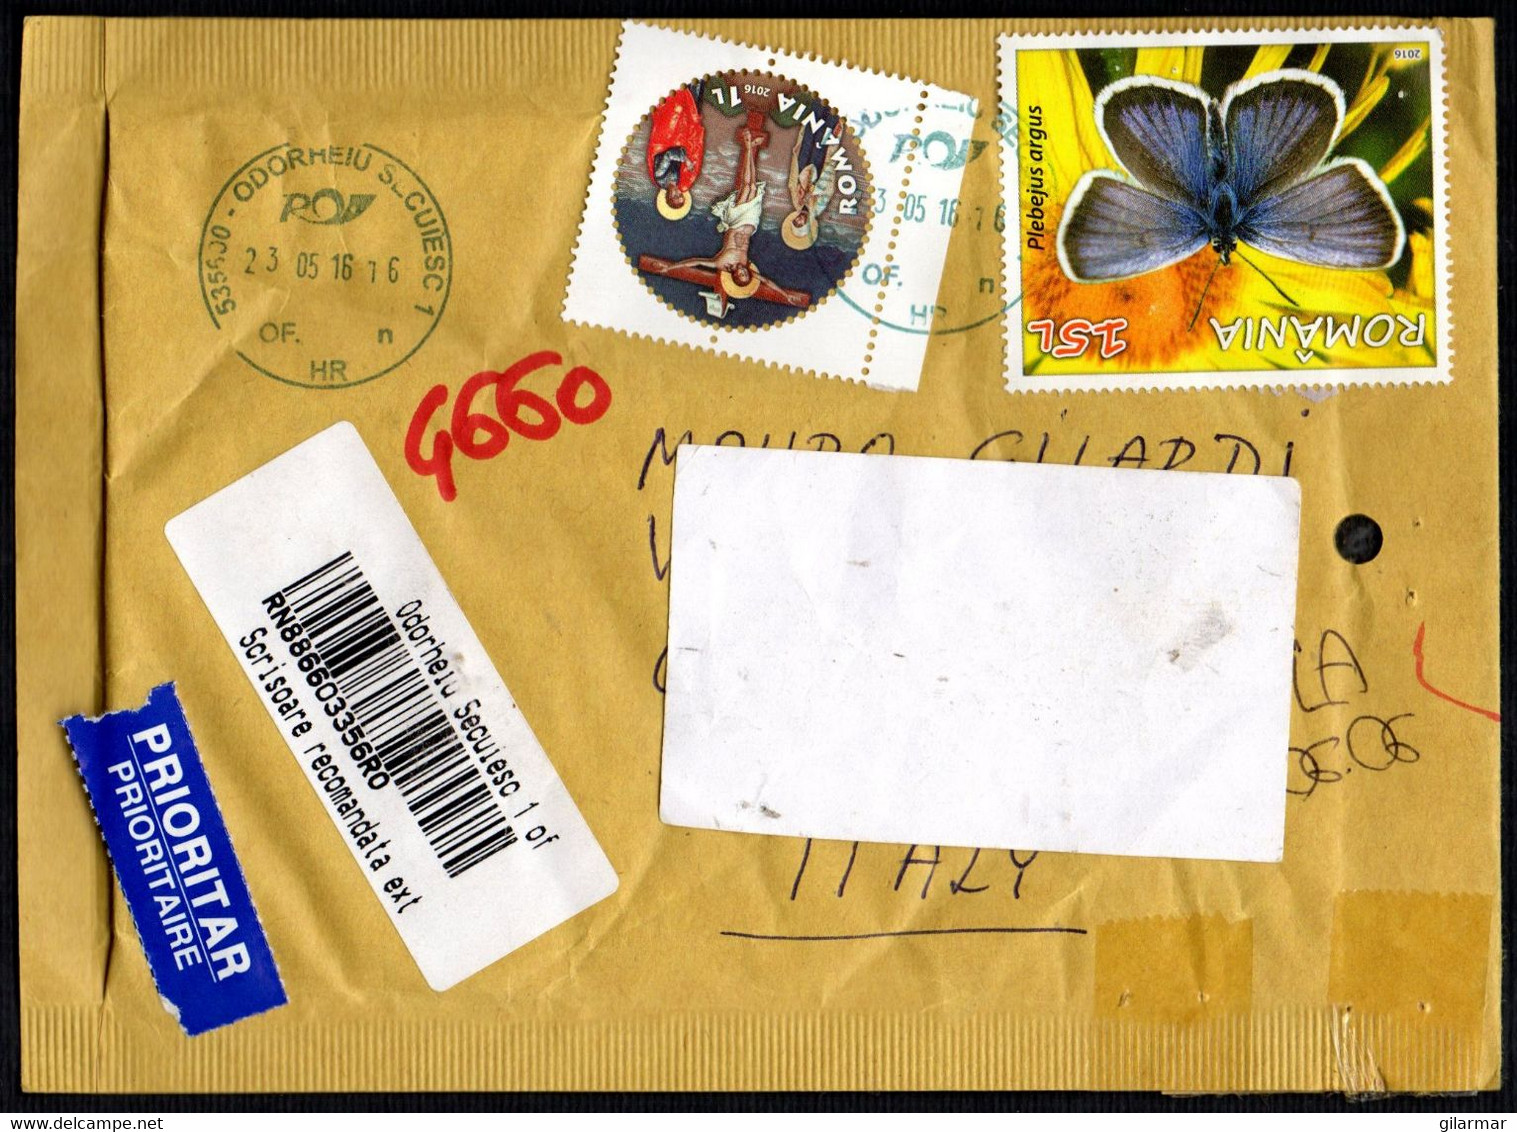 ROMANIA 2016 - REGISTERED ENVELOPE - BUTTERFLY - ARGYNNIS PARPHIA / EASTER - JESUS CHRIST CRUCIFIED - Covers & Documents